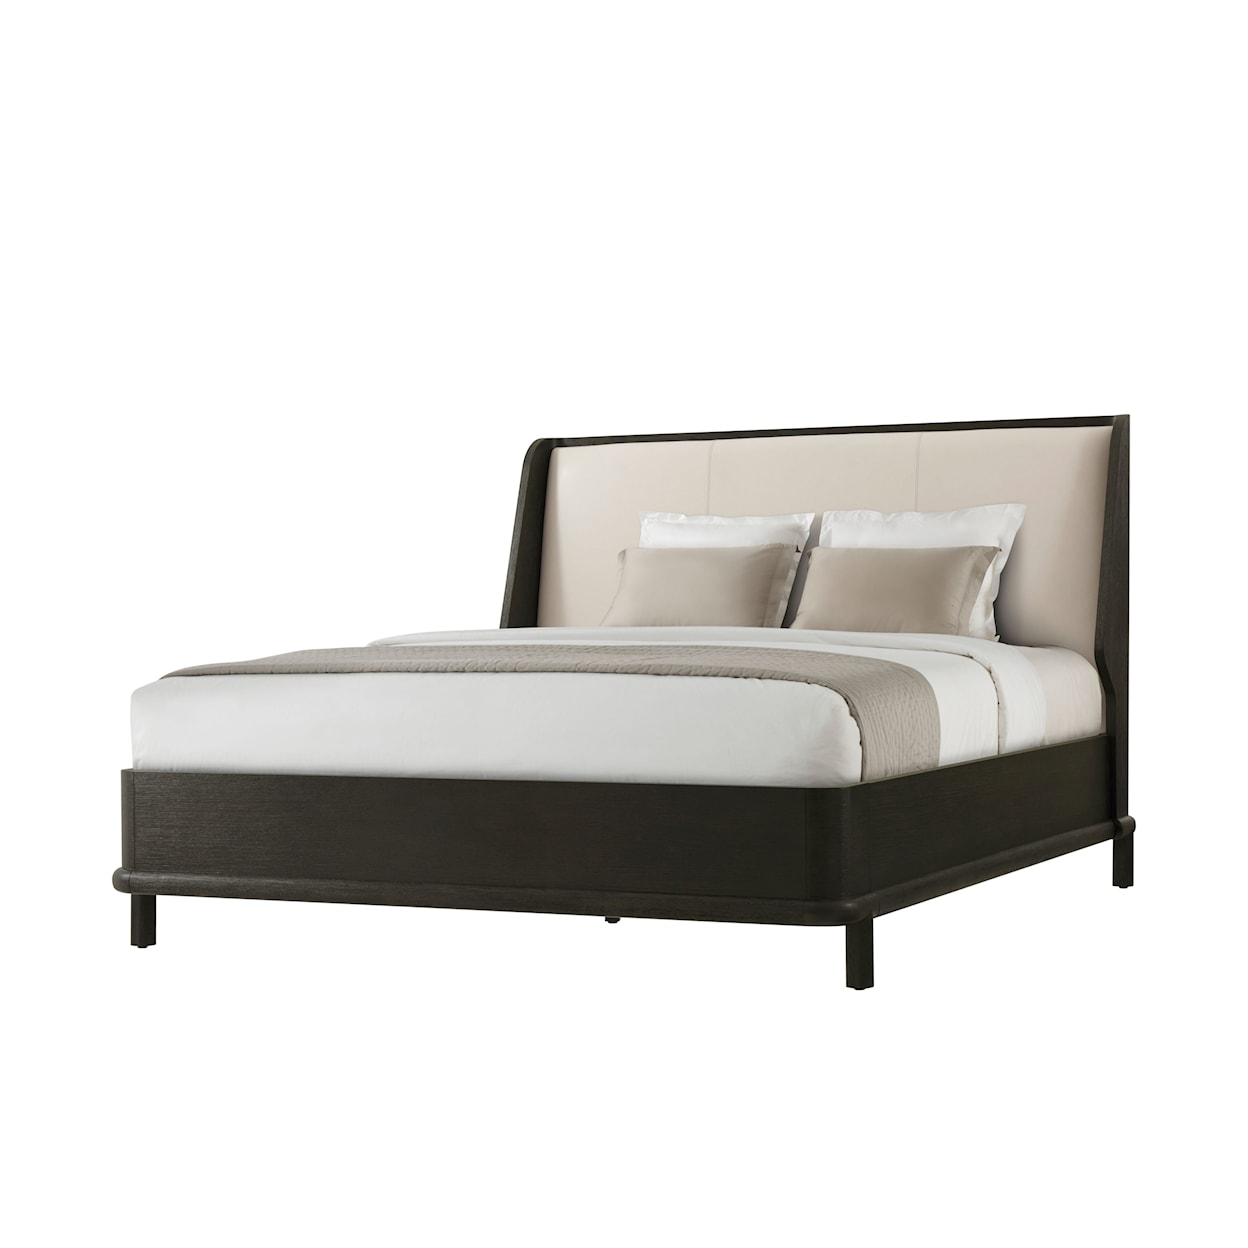 Theodore Alexander Repose Repose Wooden w/ Uph. Hdbd Cali King Bed